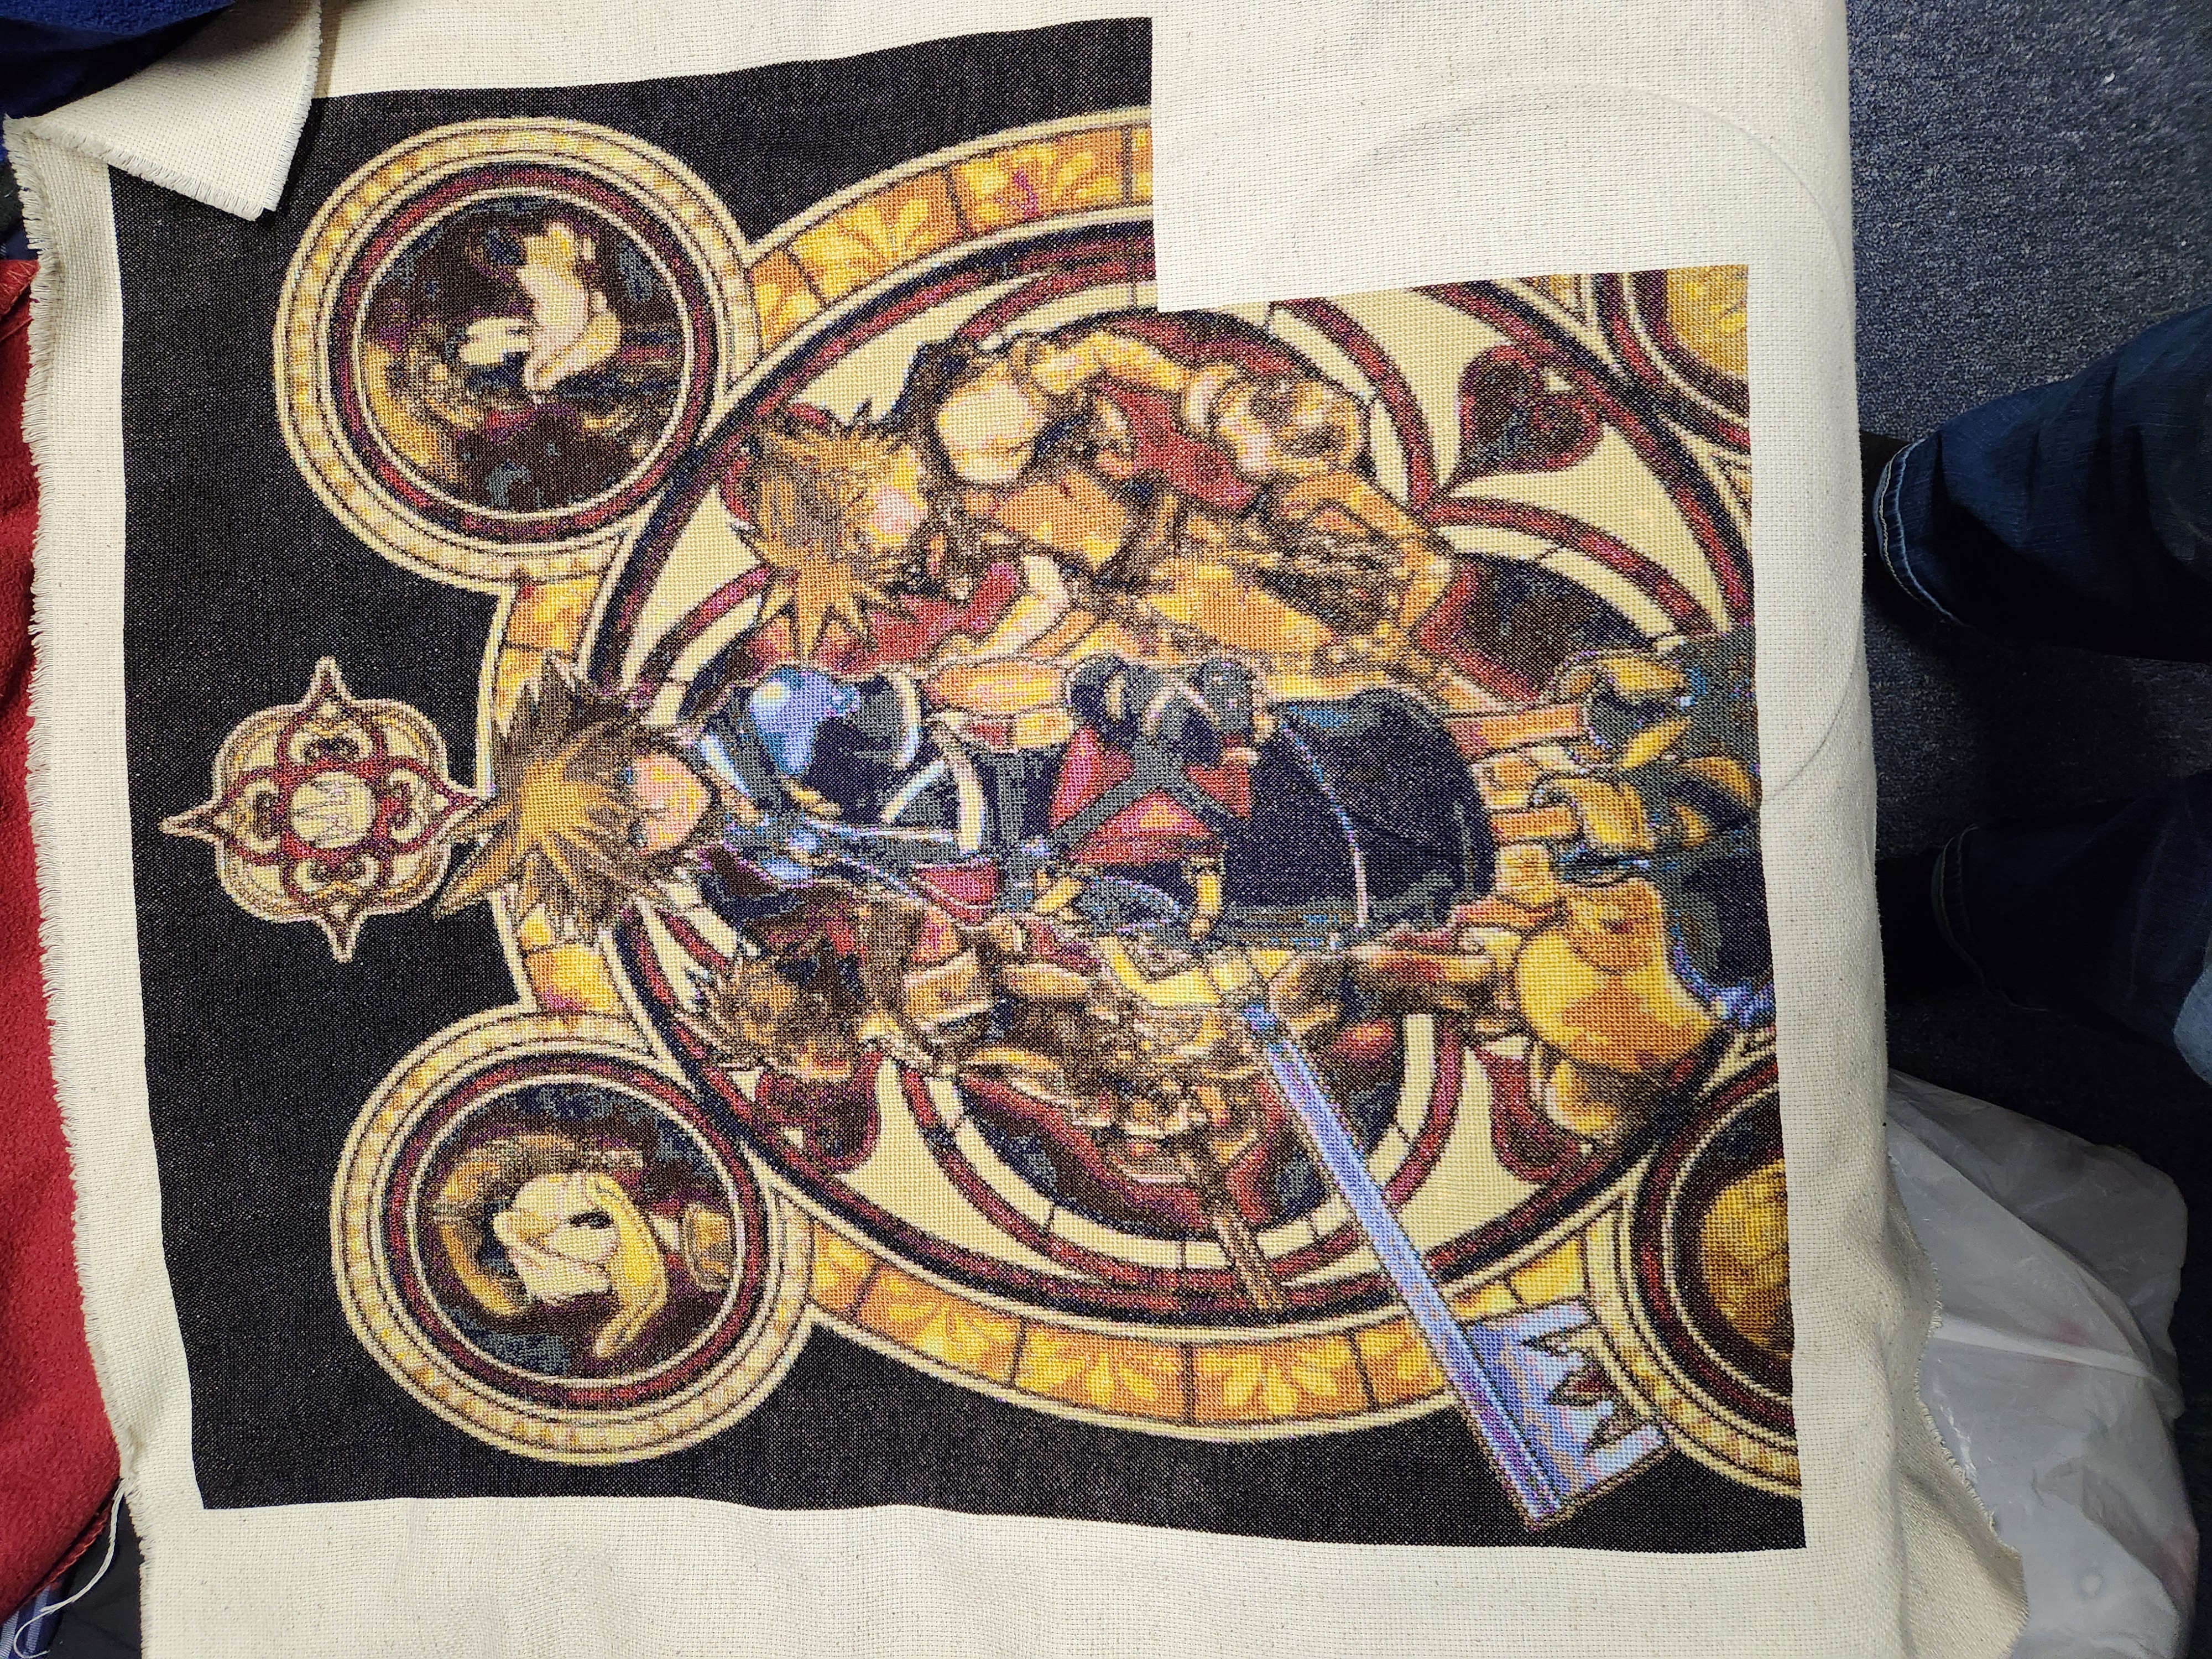 An unfinished cross stitch project featuring Sora, the main character of the Kingdom Hearts series.